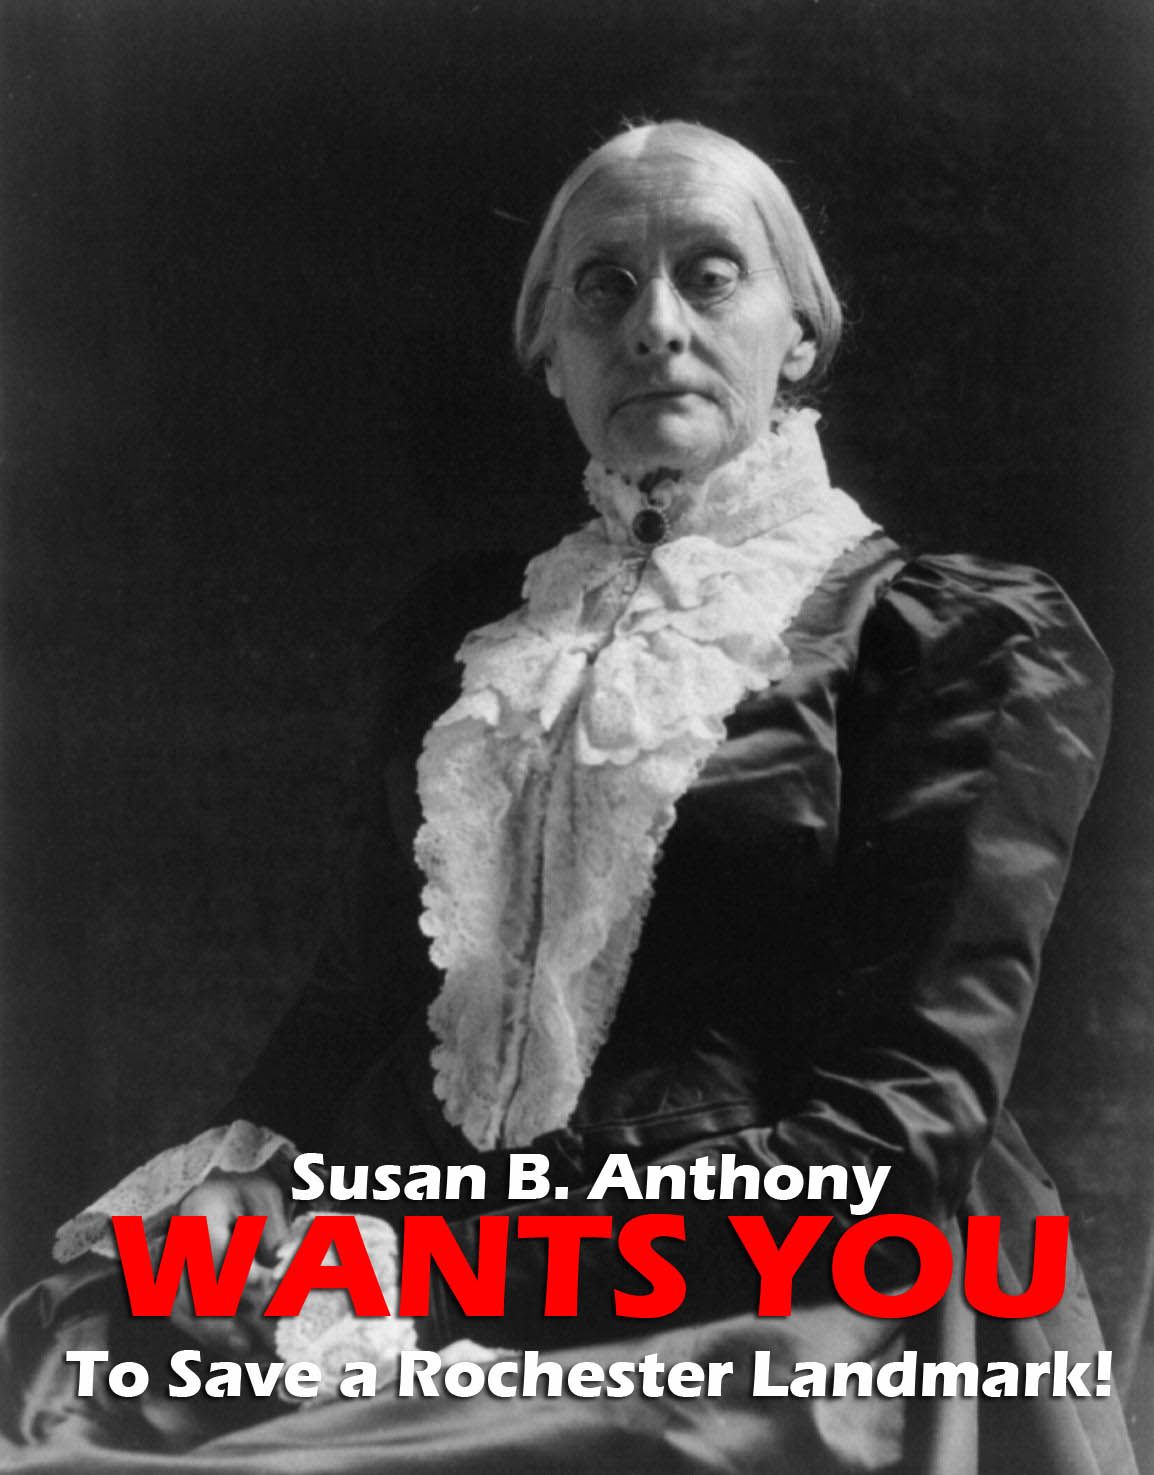 Susan B. Anthony Asks for Your Help to Save Church